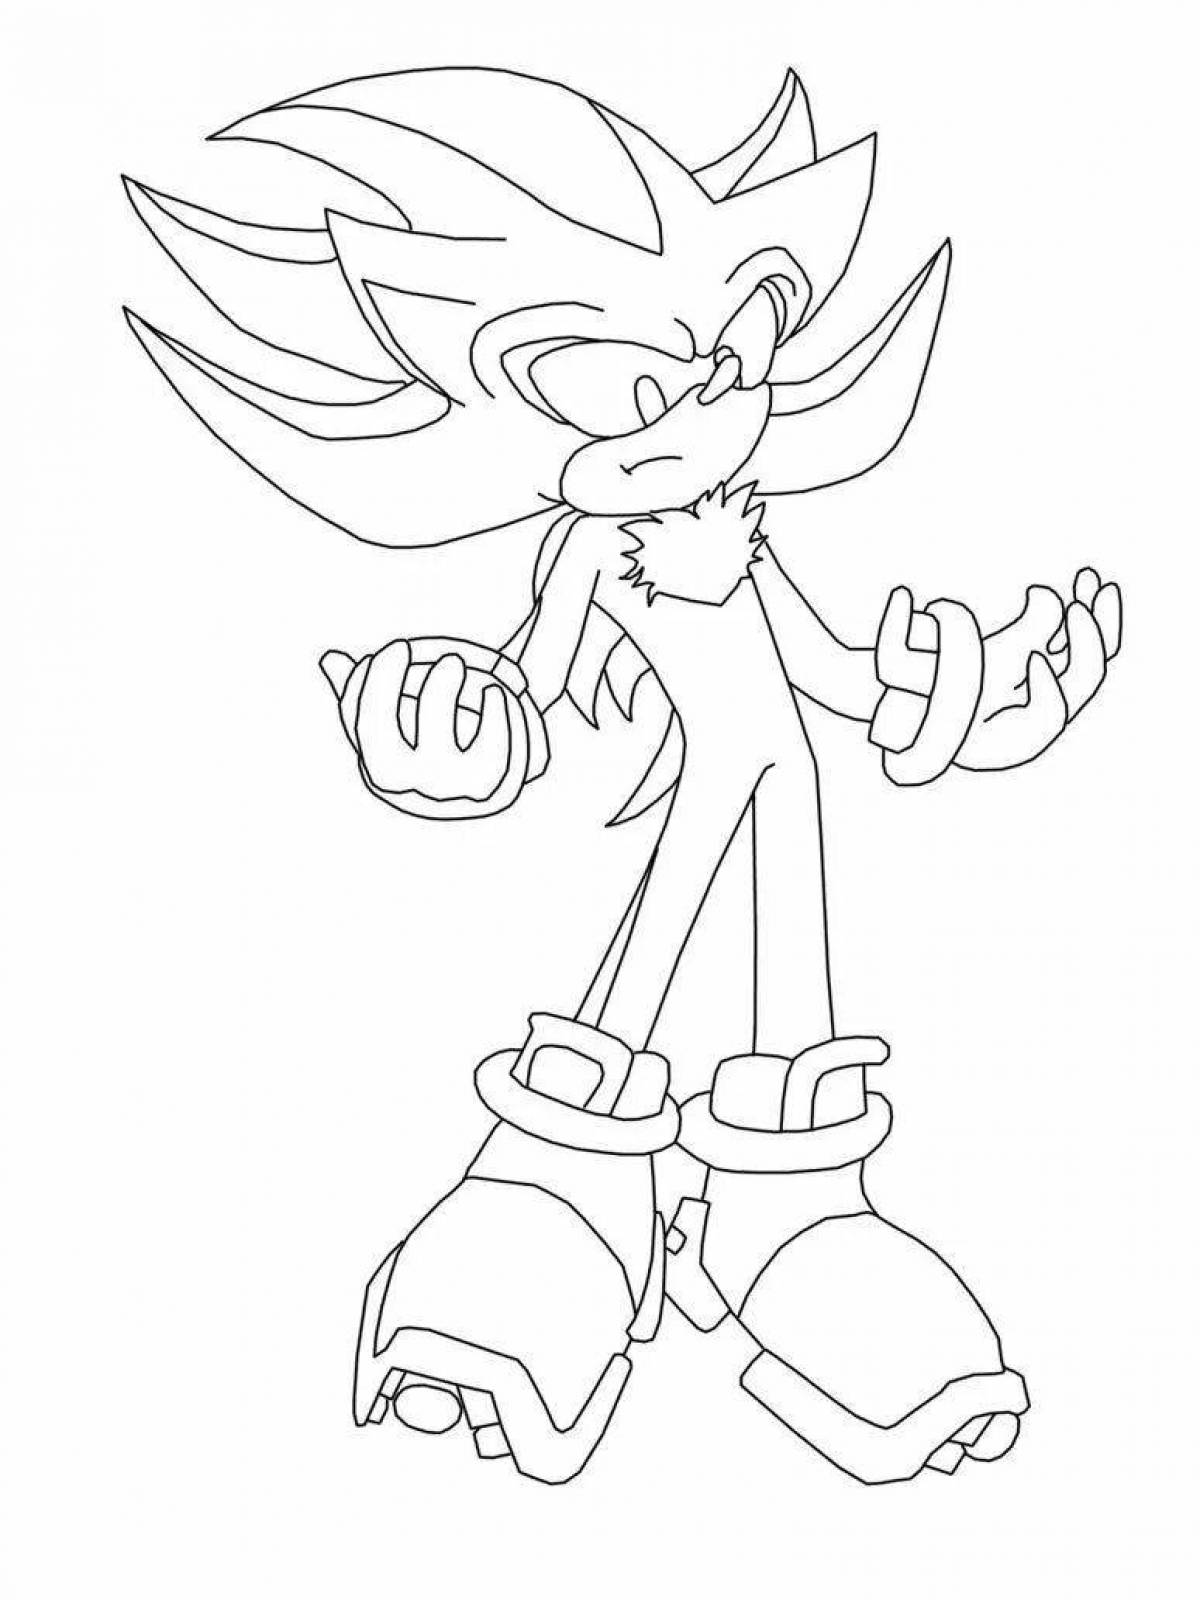 Lovely sonic shredder coloring page